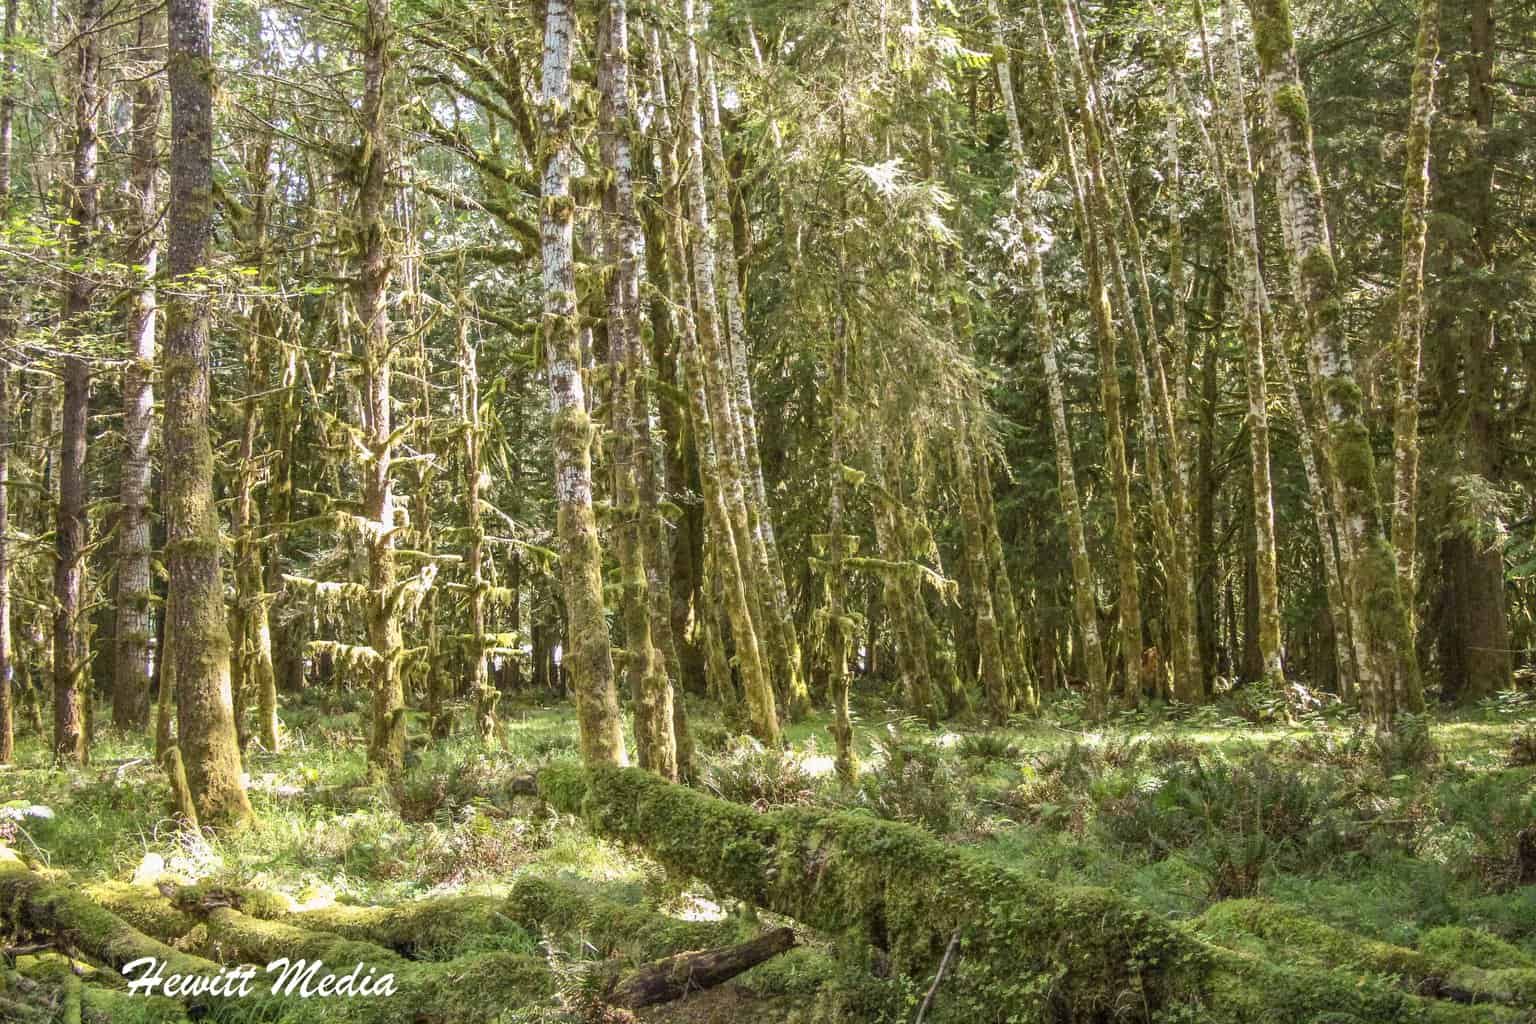 Olympic National Park Guide - Quinault Rain Forest